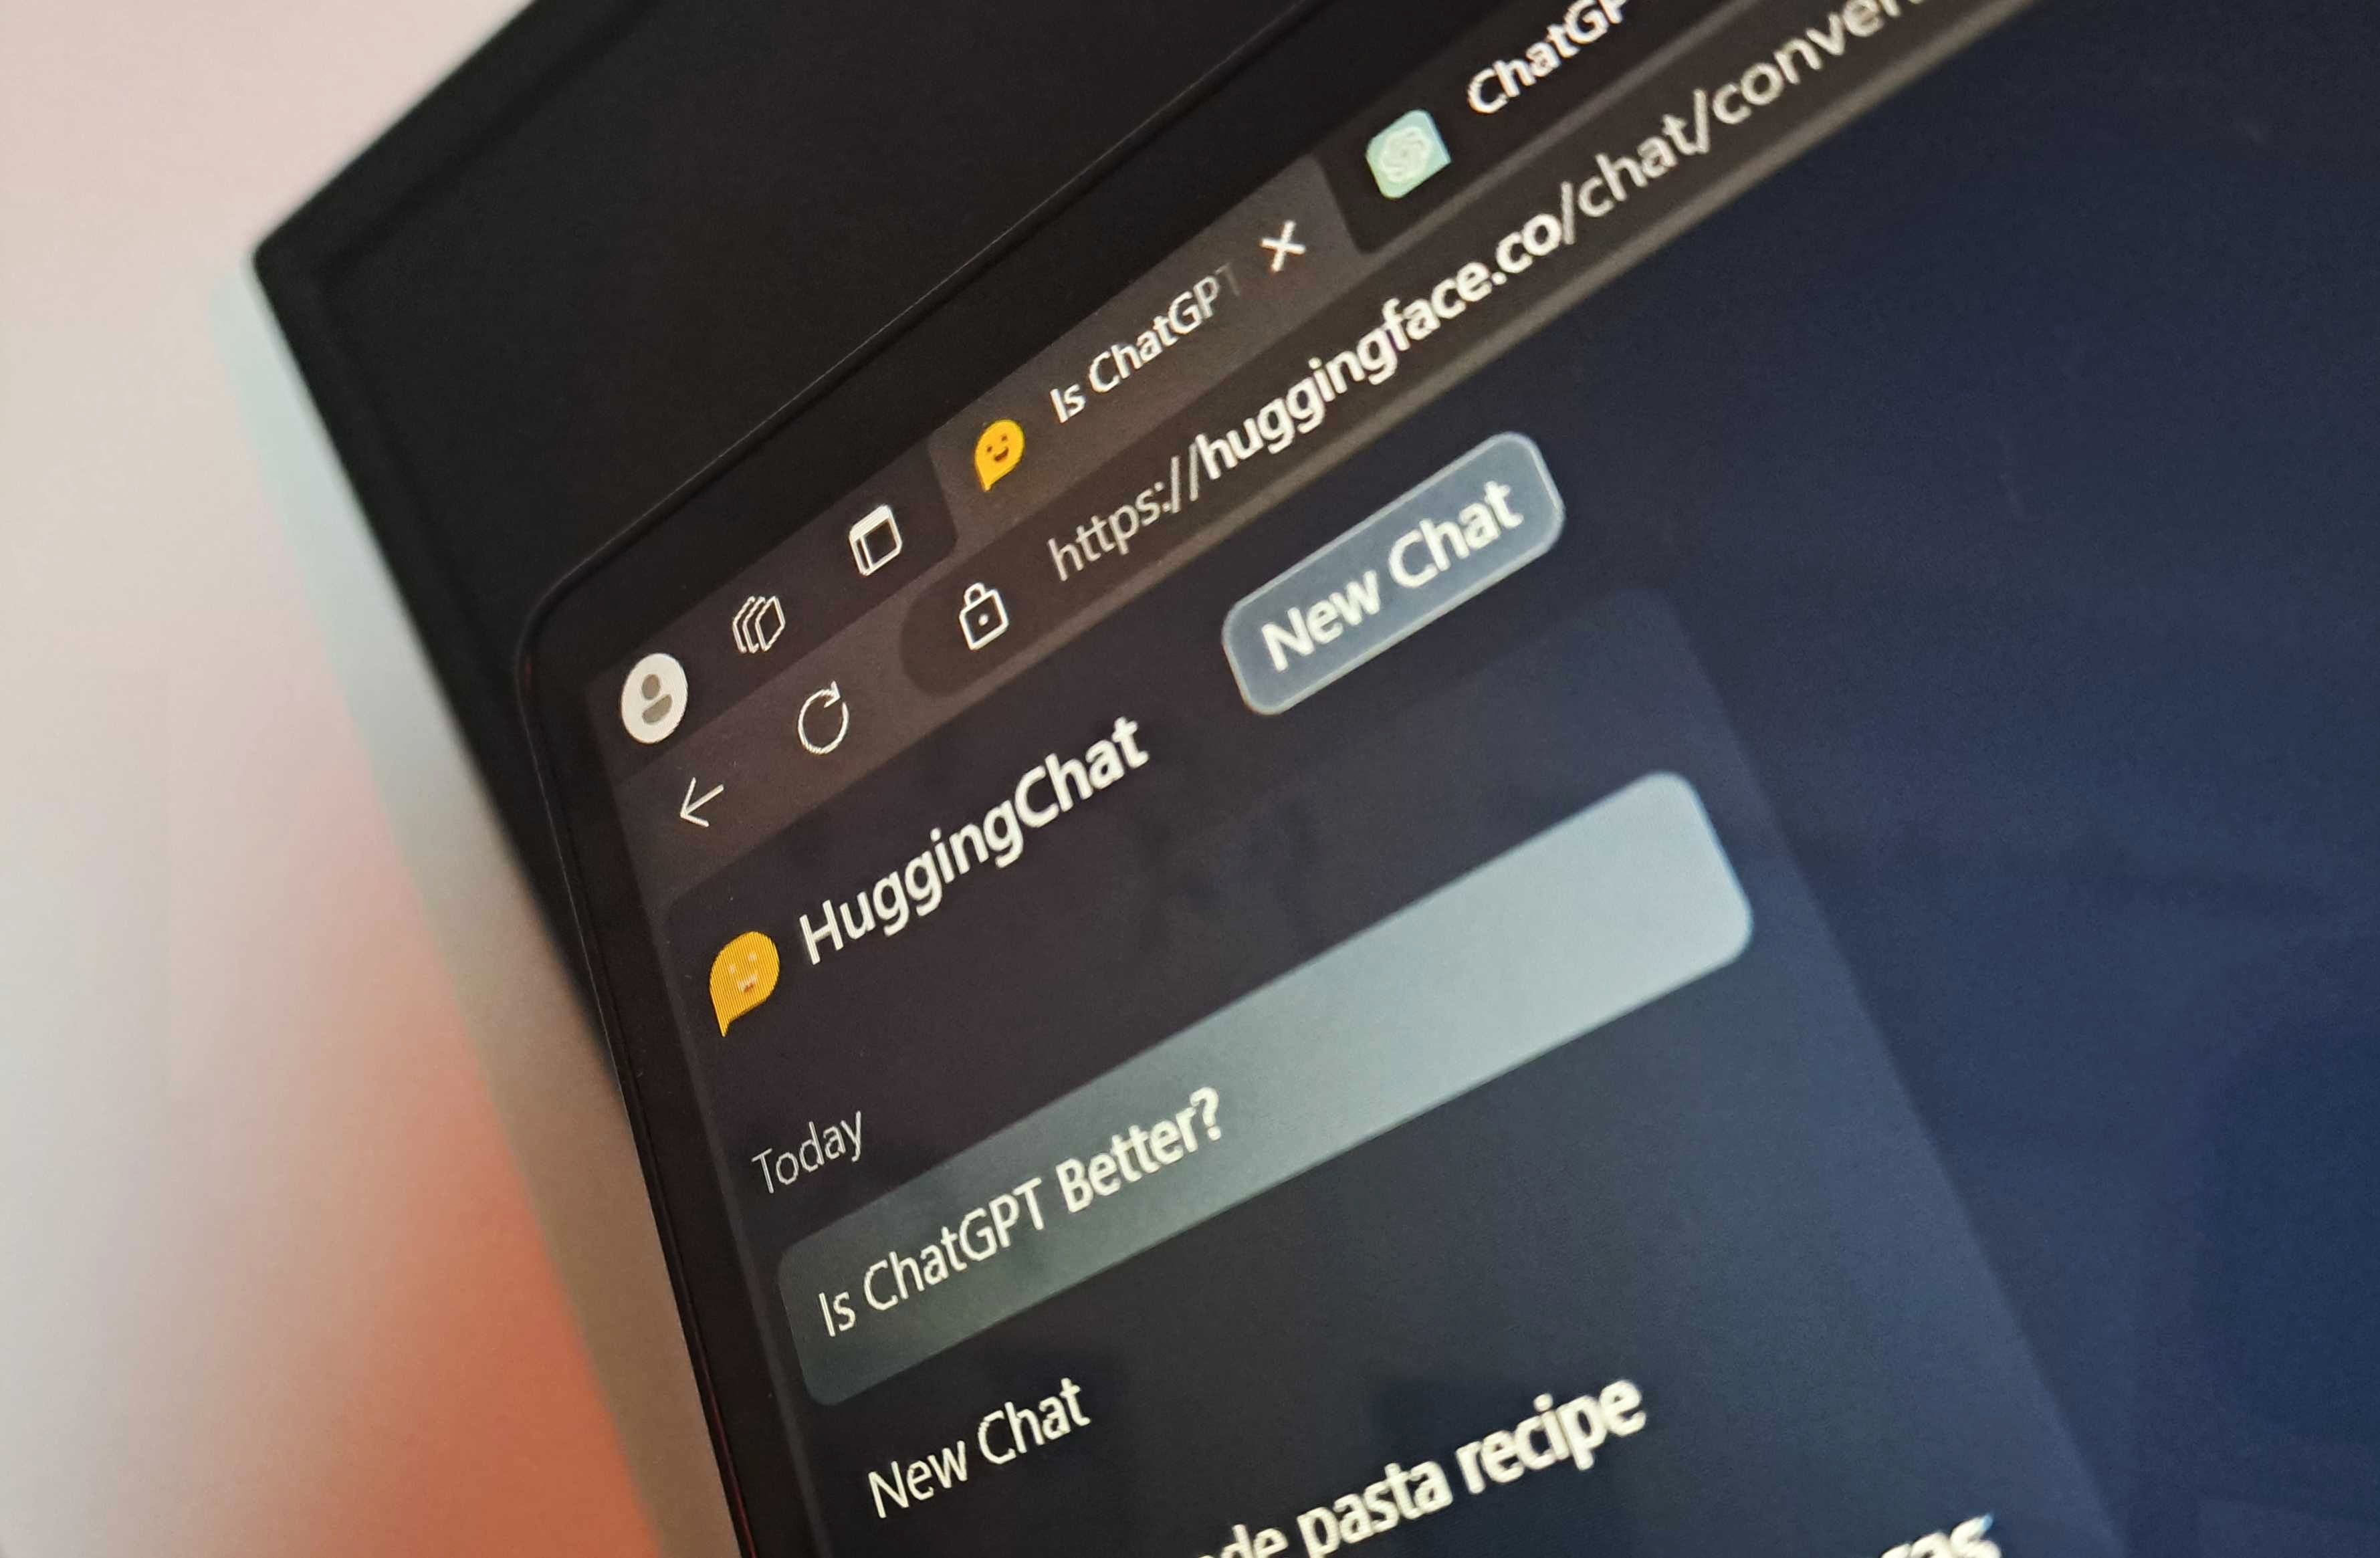 Close up photo of HuggingChat in Edge browser showing ChatGPT tab to the side.